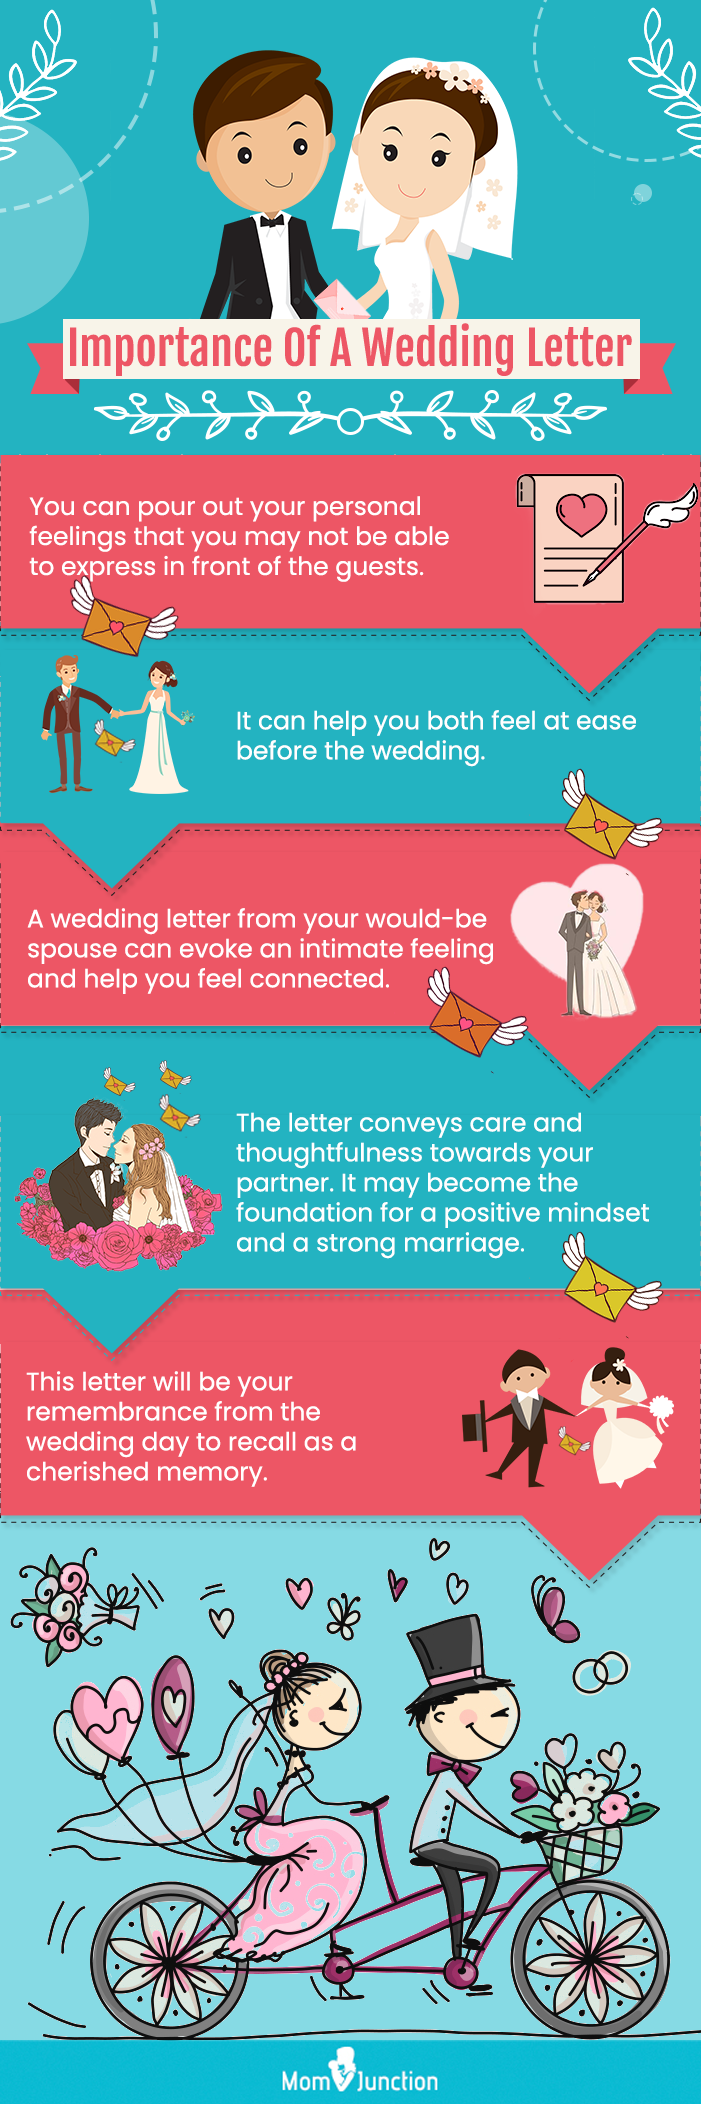 importance of wedding letter (infographic)